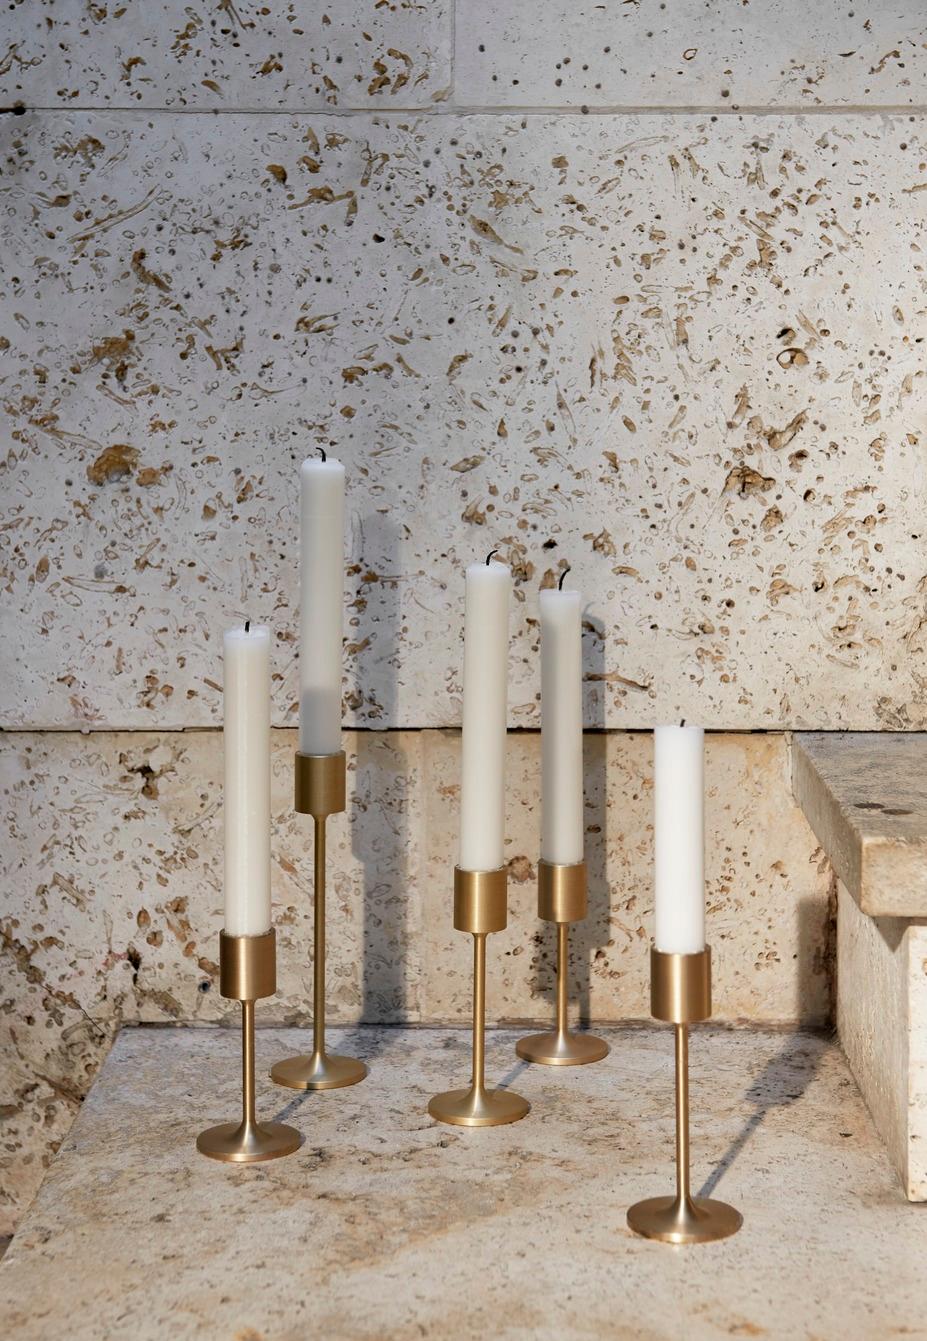 Inspired by the striking simplicity of Doric columns found in Ancient Greece, these gleaming brushed brass candleholders are a sculptural addition to the home. 
They sit within Collect, a curated line of beautifully crafted soft furnishings and